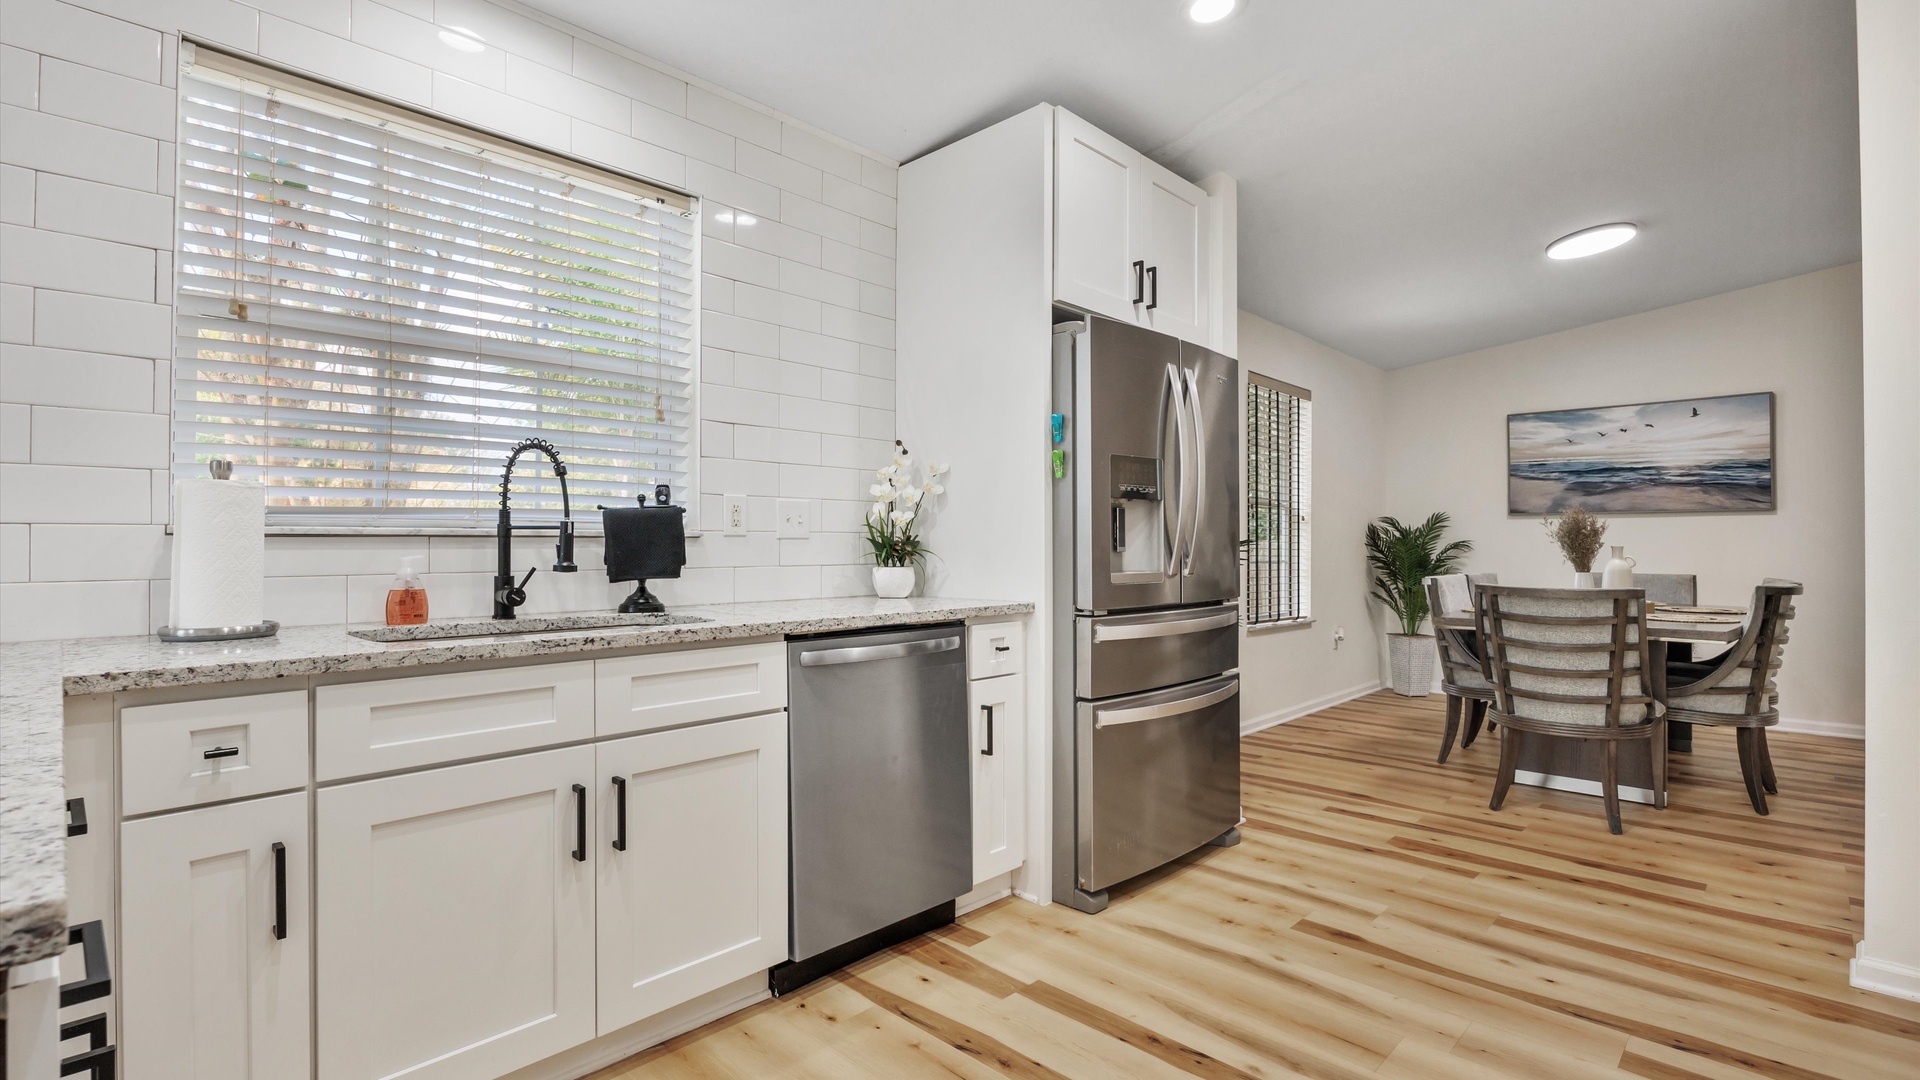 The airy, updated kitchen offers ample space & all the comforts of home